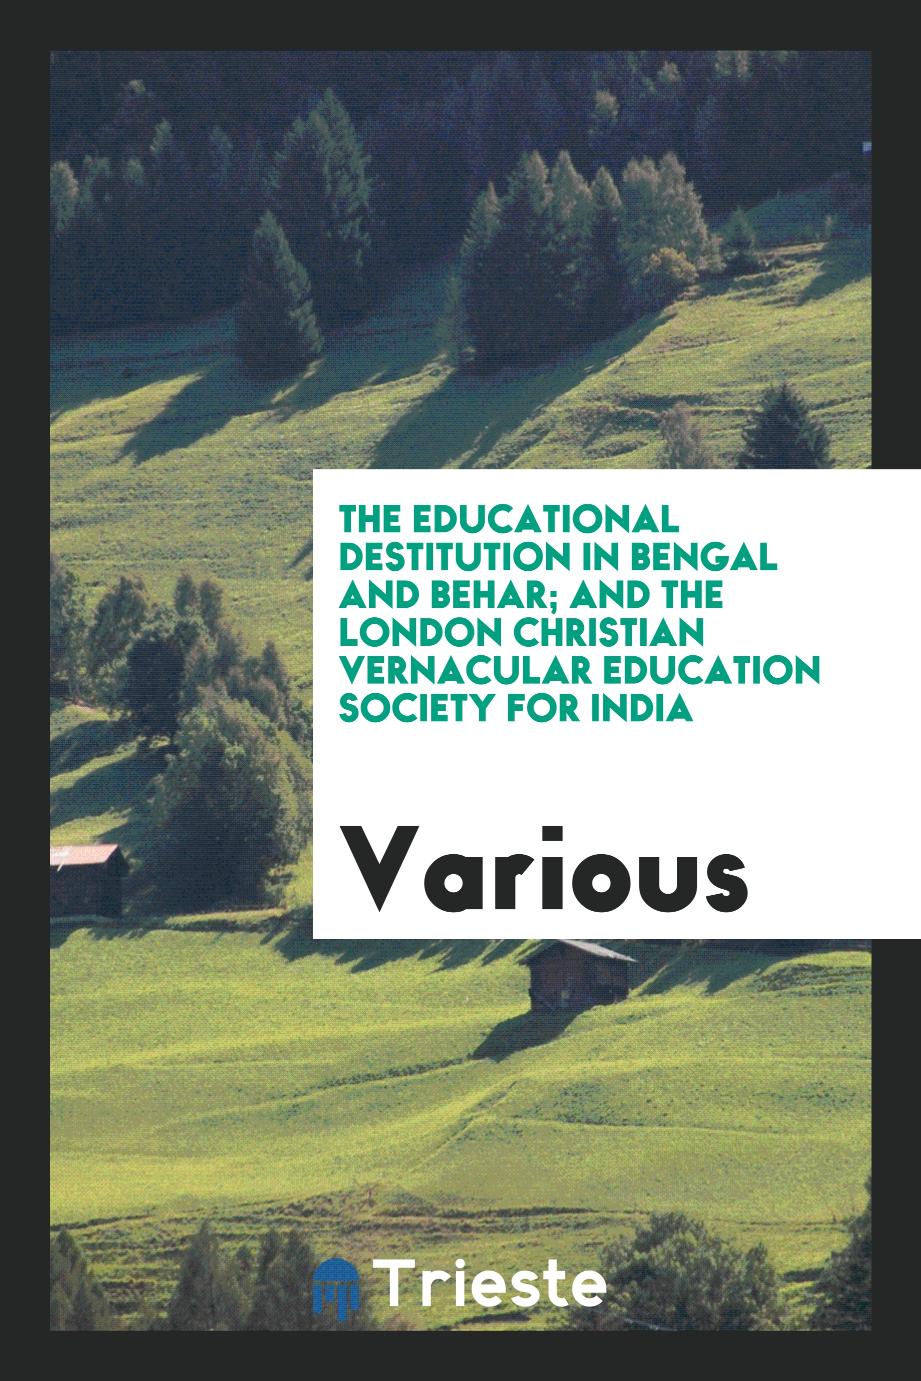 The educational destitution in Bengal and Behar; and the London Christian vernacular education society for India